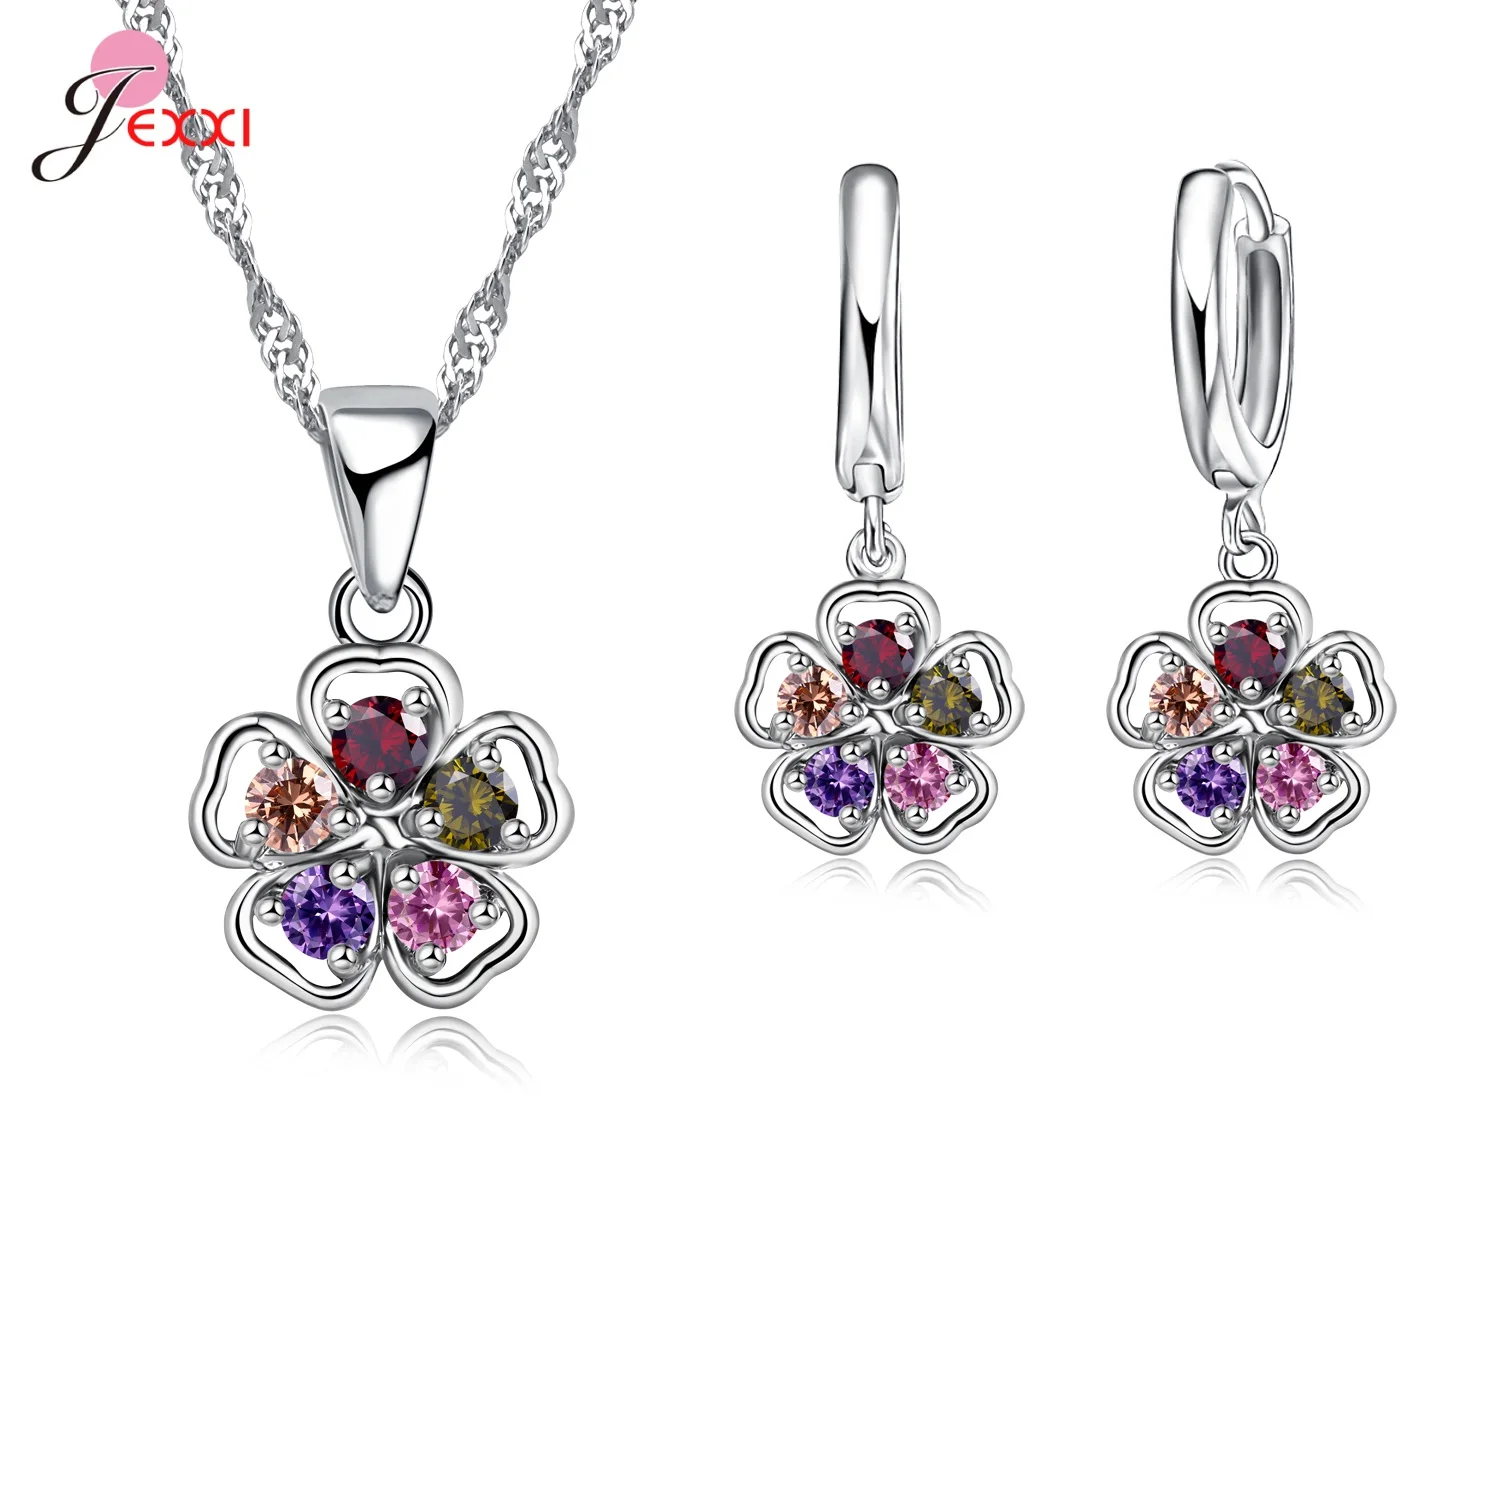 supergirl supermom mother pretty earrings earring and necklace set great gift  